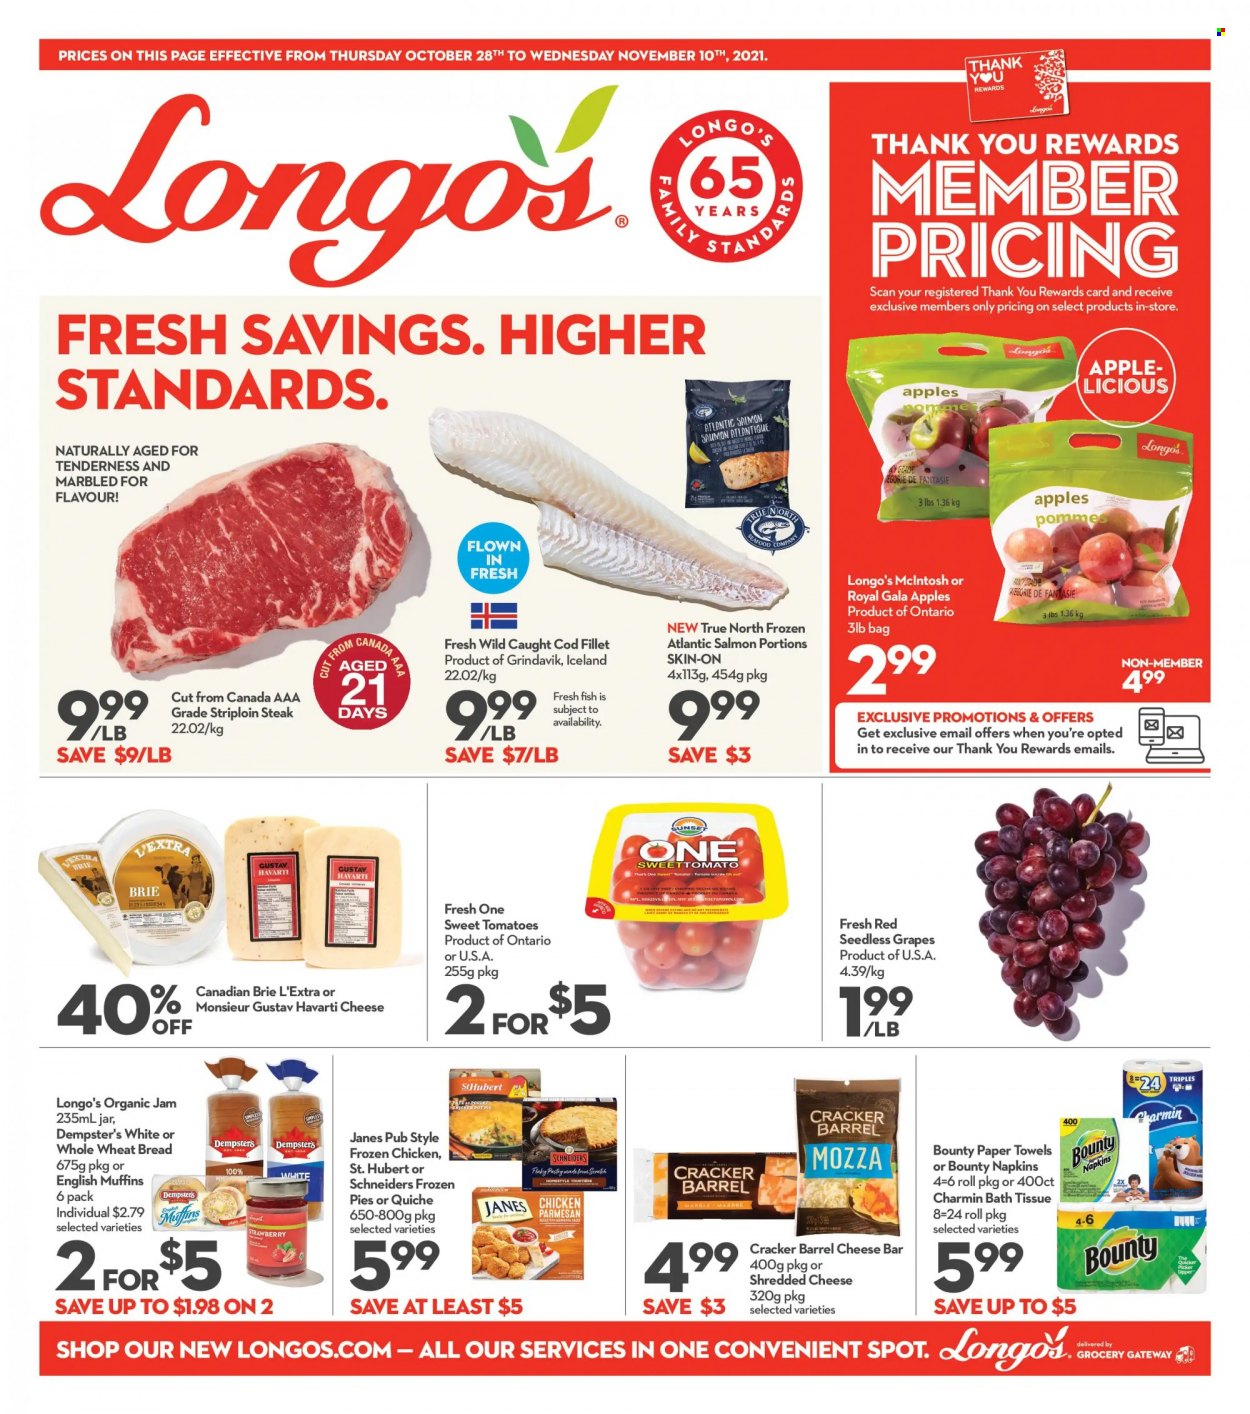 thumbnail - Longo's Flyer - October 28, 2021 - November 10, 2021 - Sales products - english muffins, wheat bread, tomatoes, apples, Gala, grapes, seedless grapes, cod, salmon, seafood, fish, shredded cheese, Havarti, brie, quiche, Bounty, crackers, fruit jam, chicken, beef meat, striploin steak, napkins, bath tissue, kitchen towels, paper towels, Charmin, steak. Page 1.